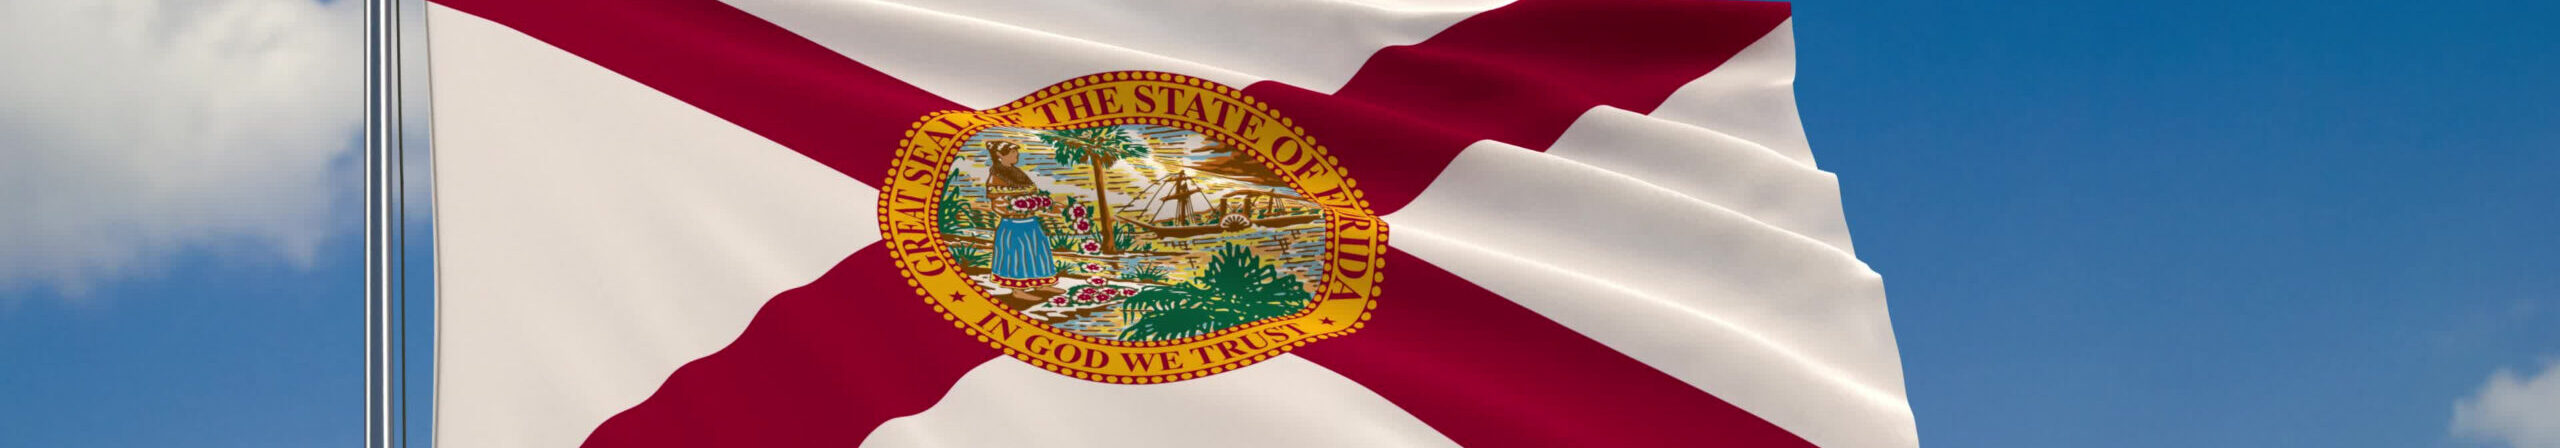 Flag of Florida - US state fluttering in the wind against a cloudy sky 3d rendering